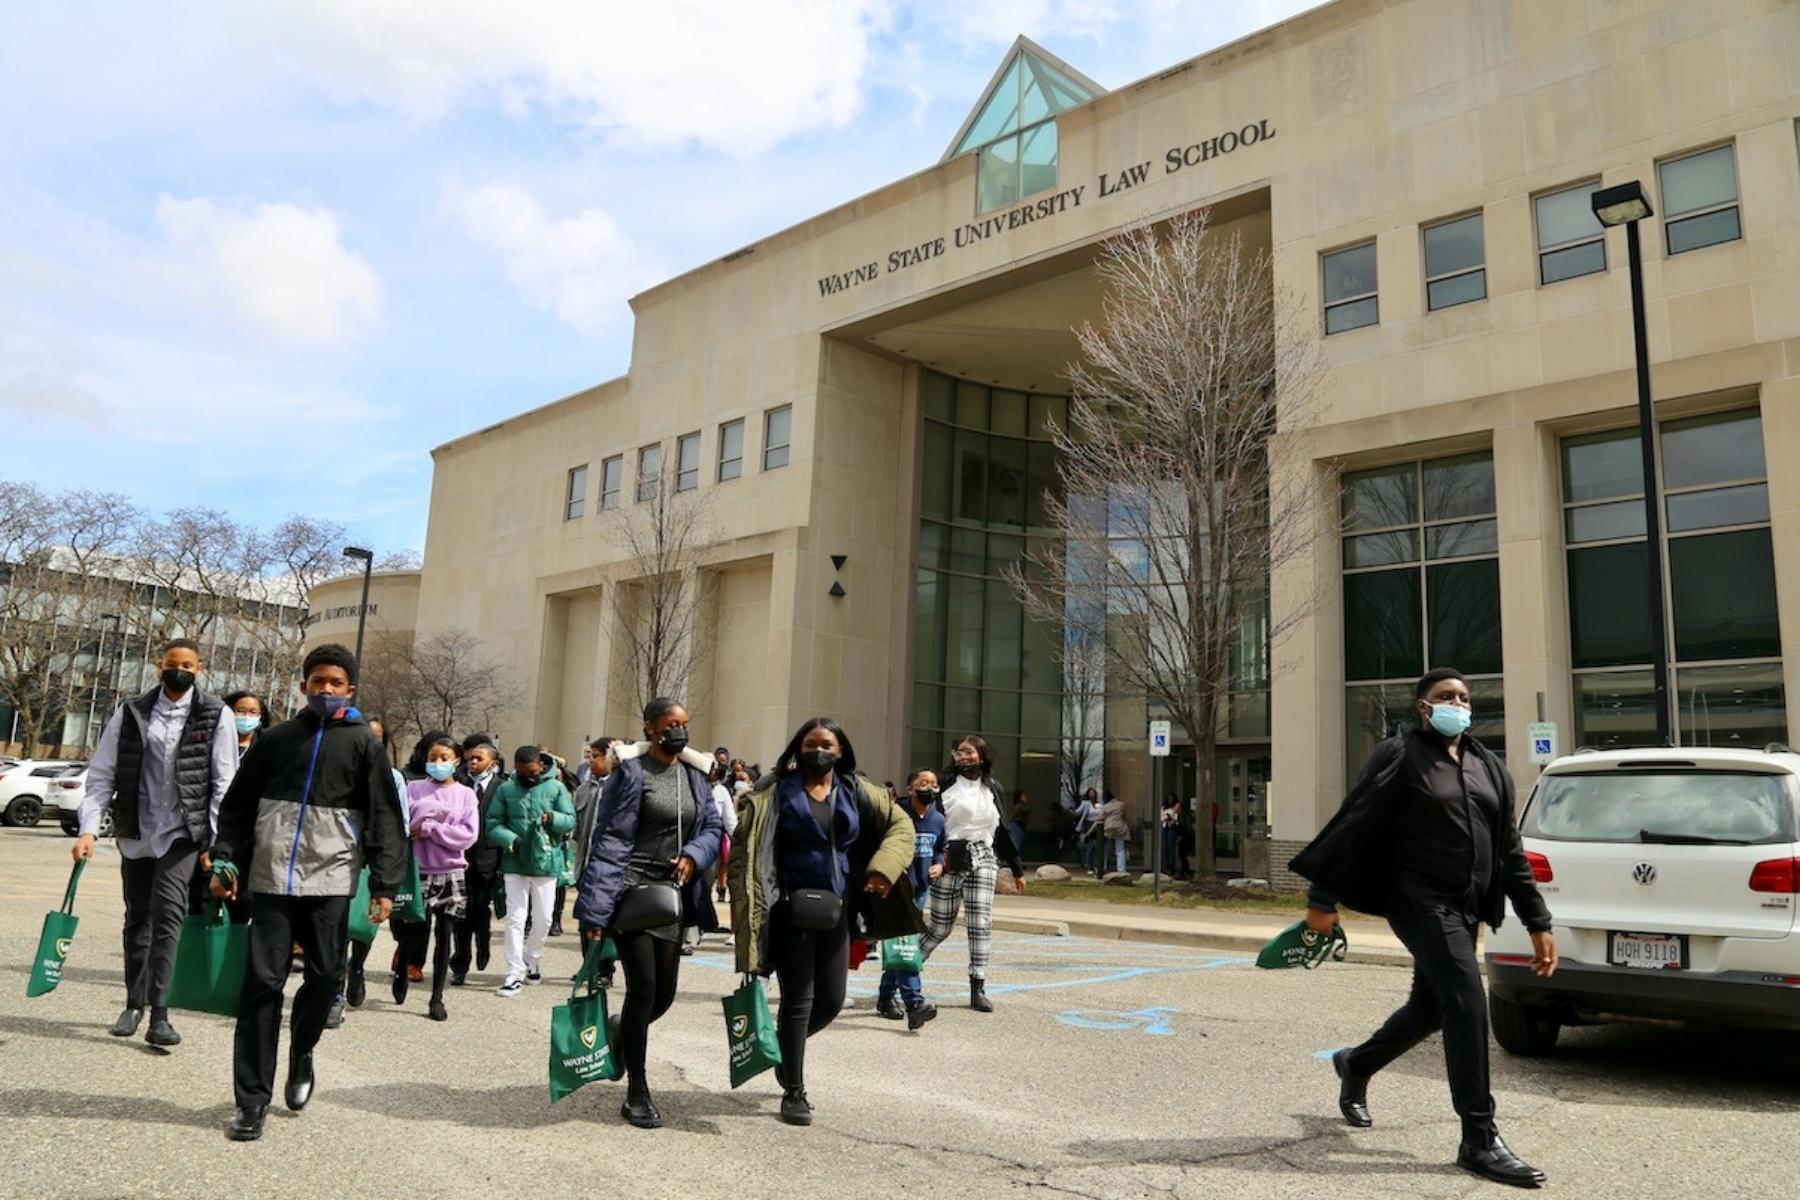 A group of students from the David Ellis Academy walk in the parking lot outside Wayne State University Law School with the building and sign in the background